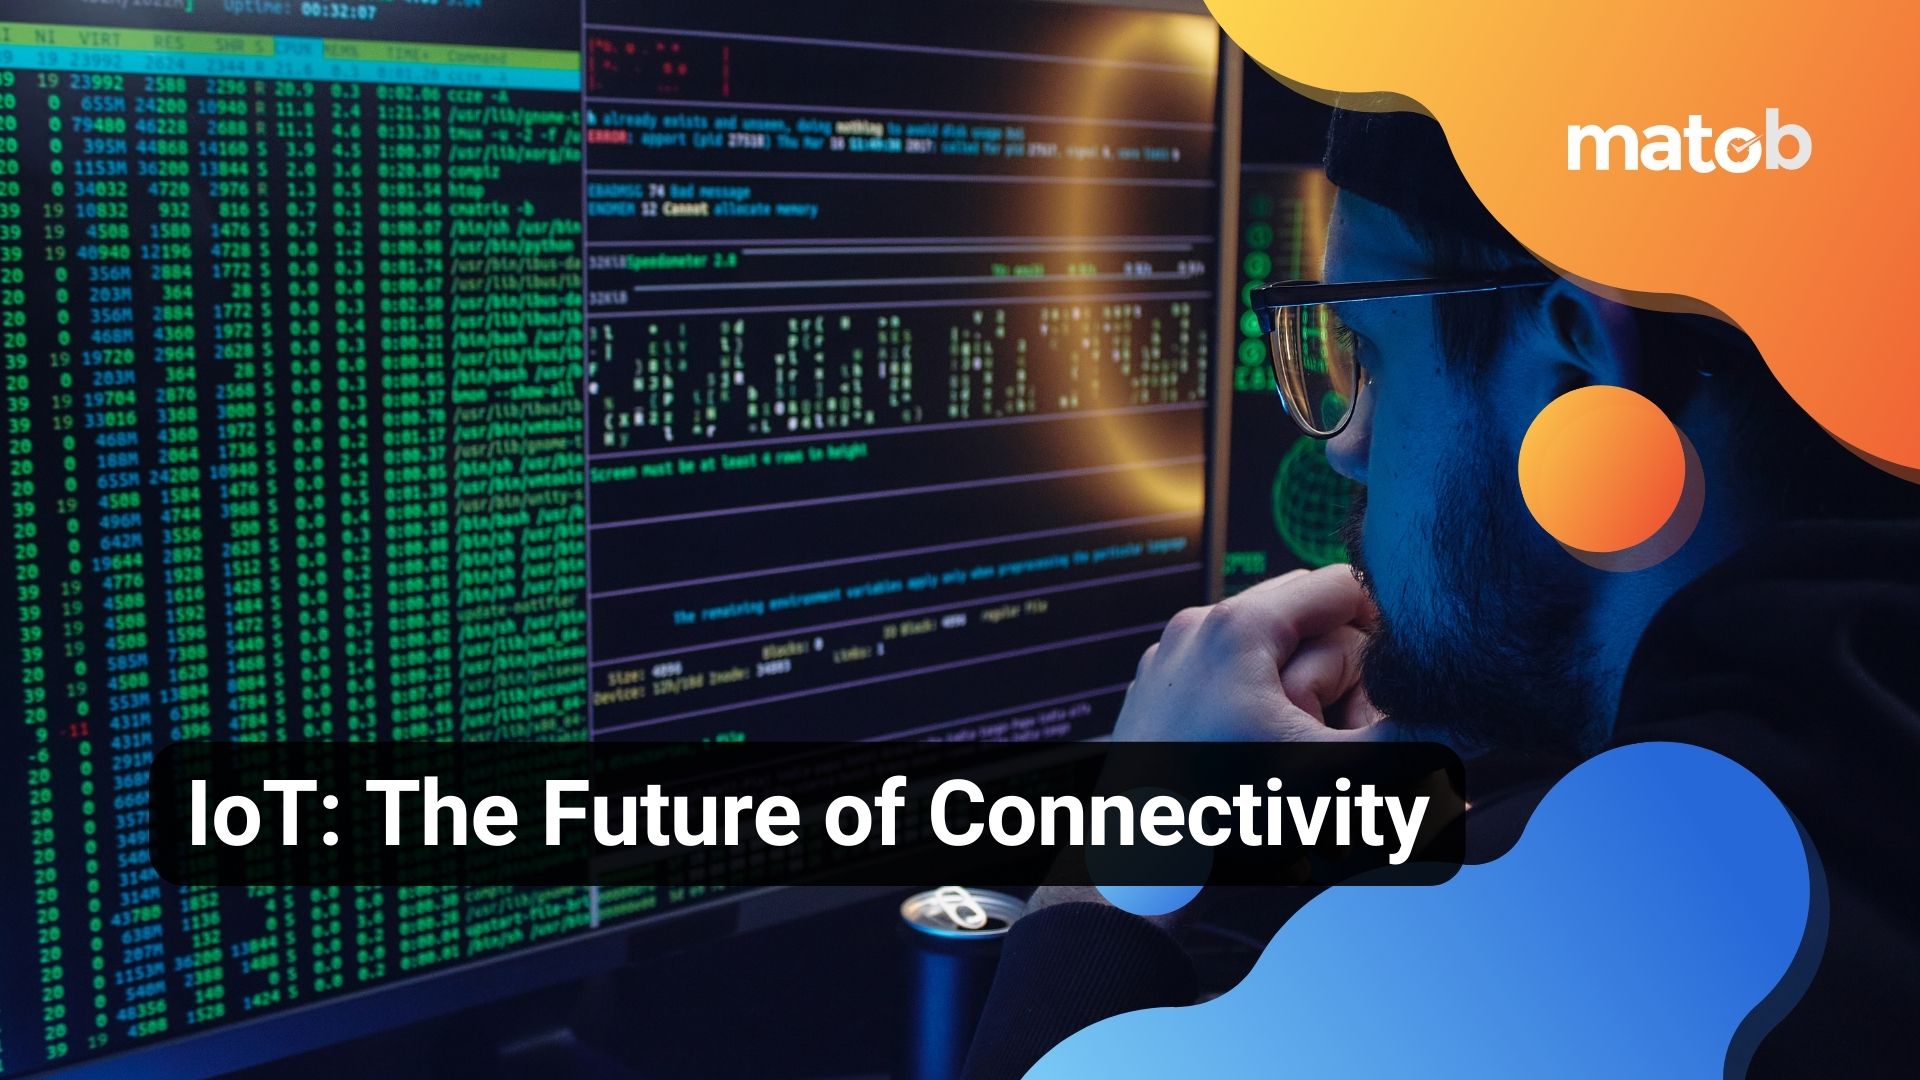 IoT: The Future of Connectivity